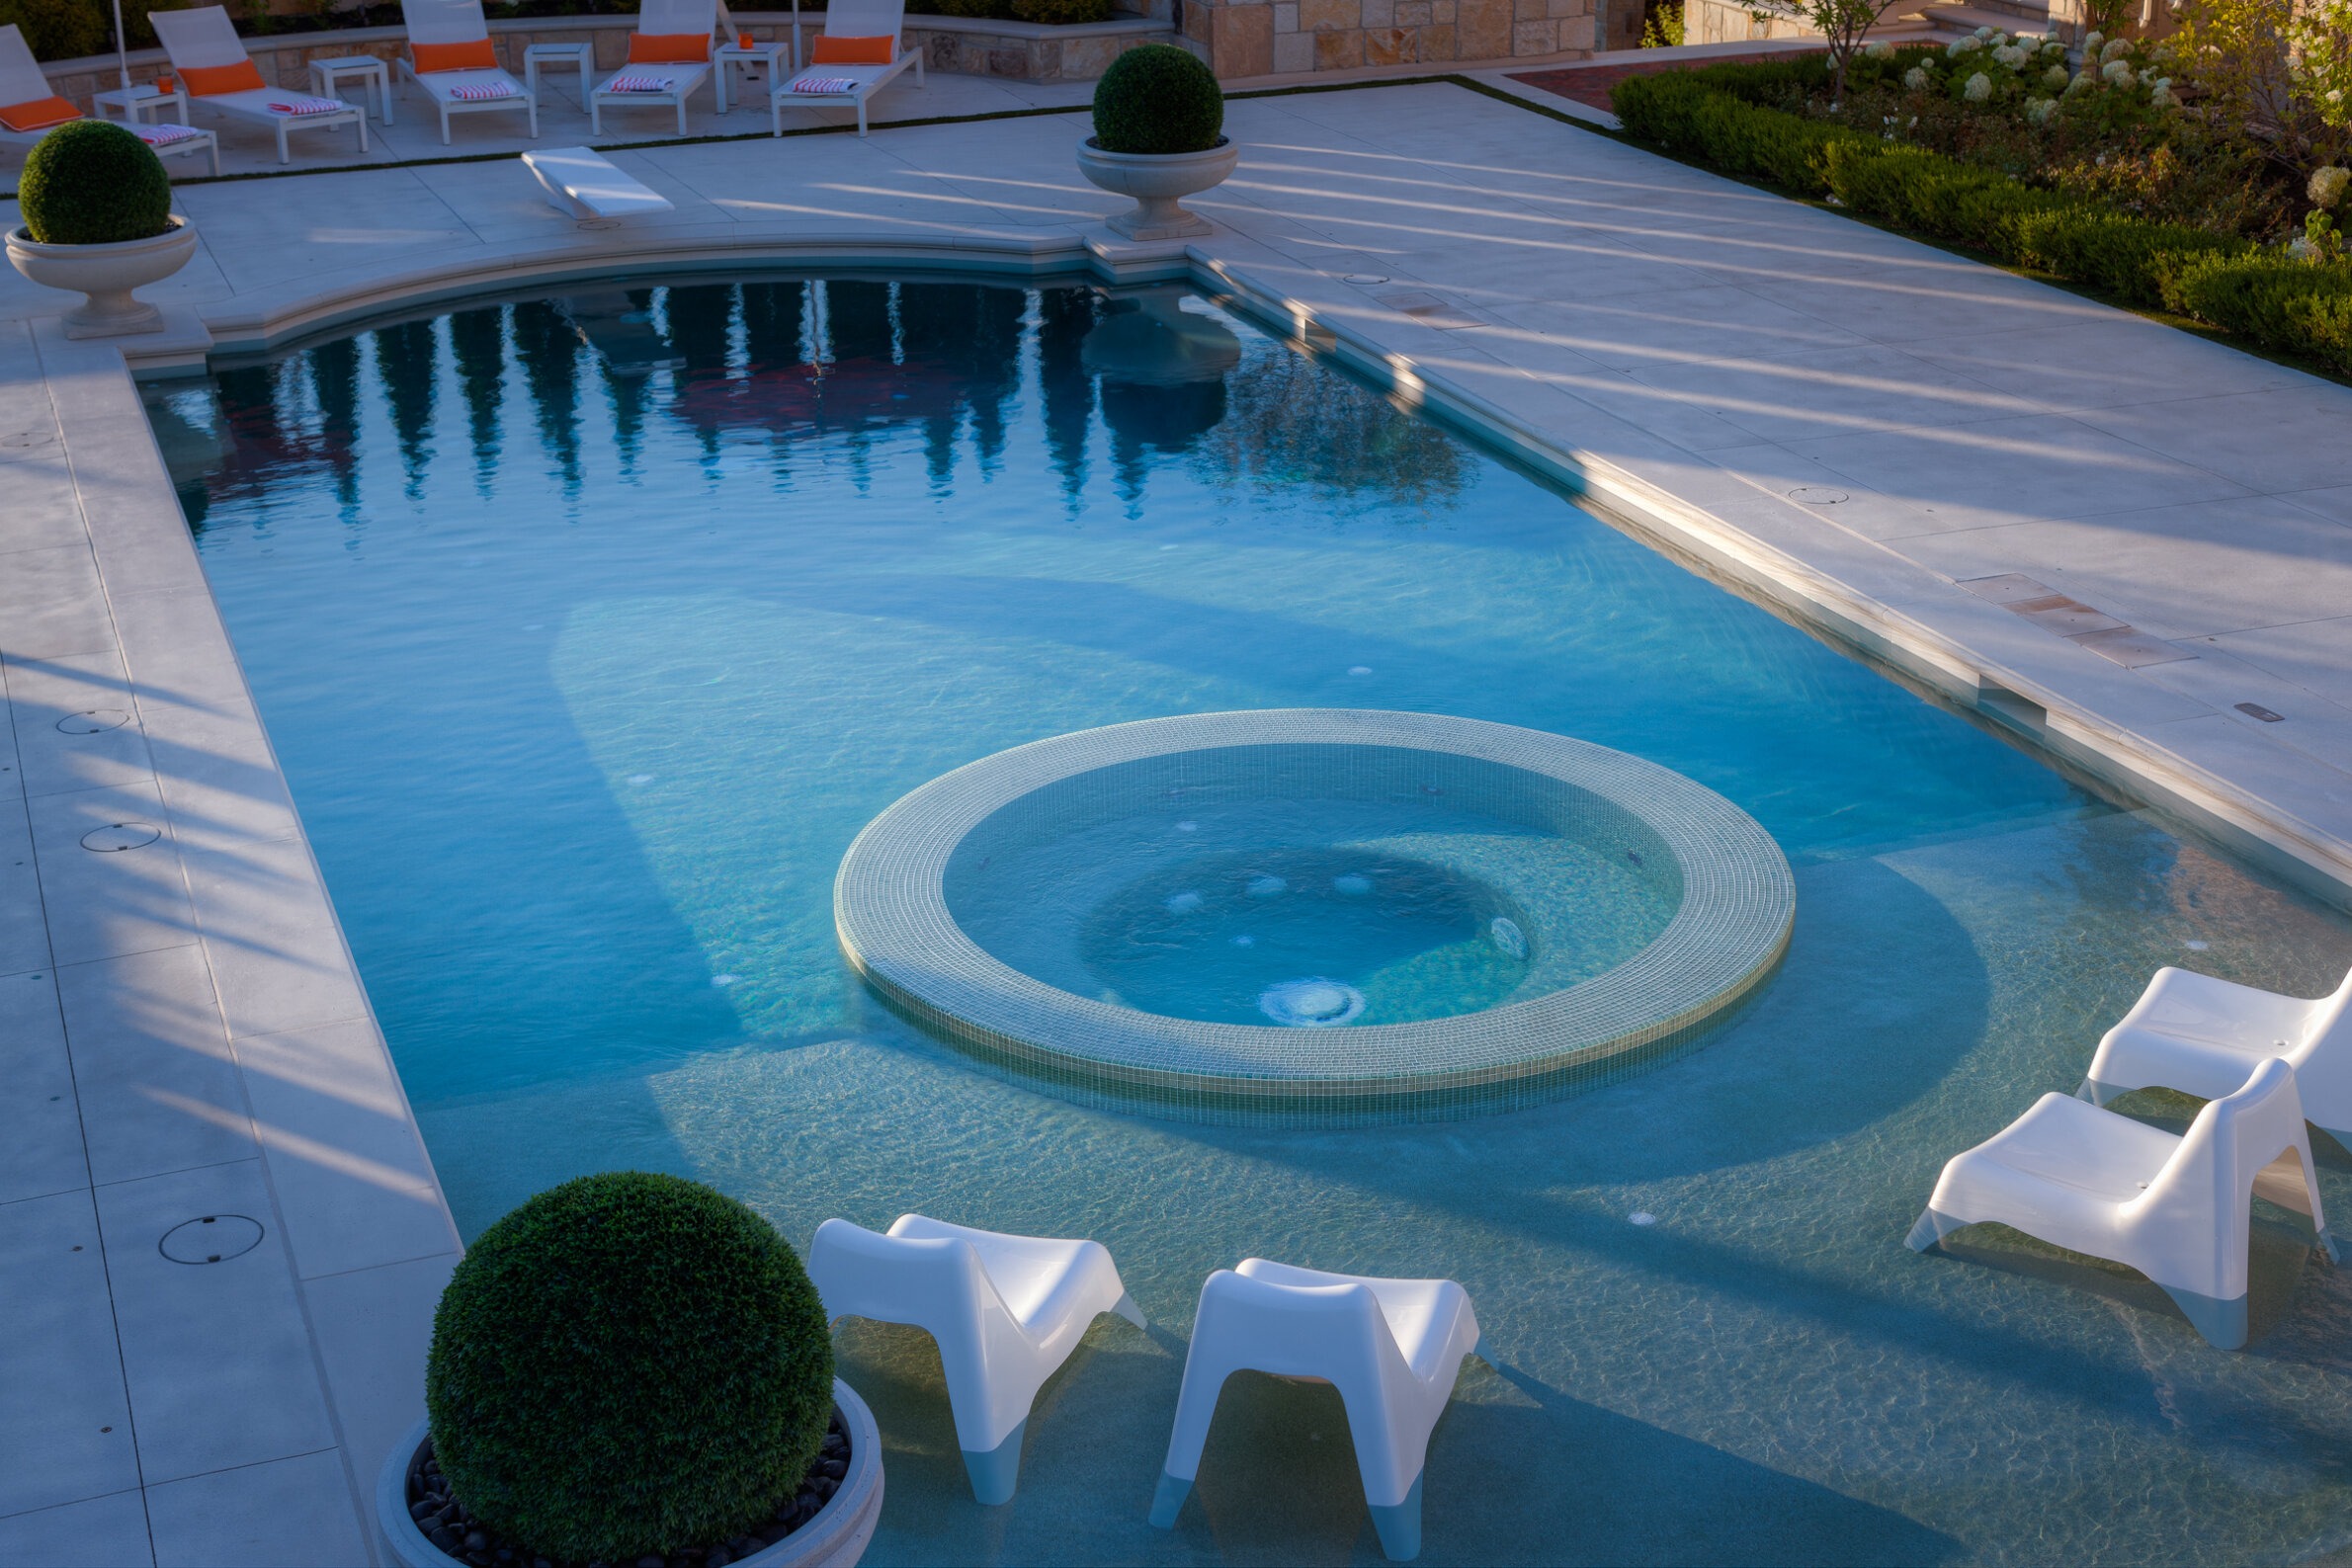 This image shows an outdoor swimming pool with a built-in jacuzzi, surrounded by white loungers, topiary in pots, and a well-maintained garden area.